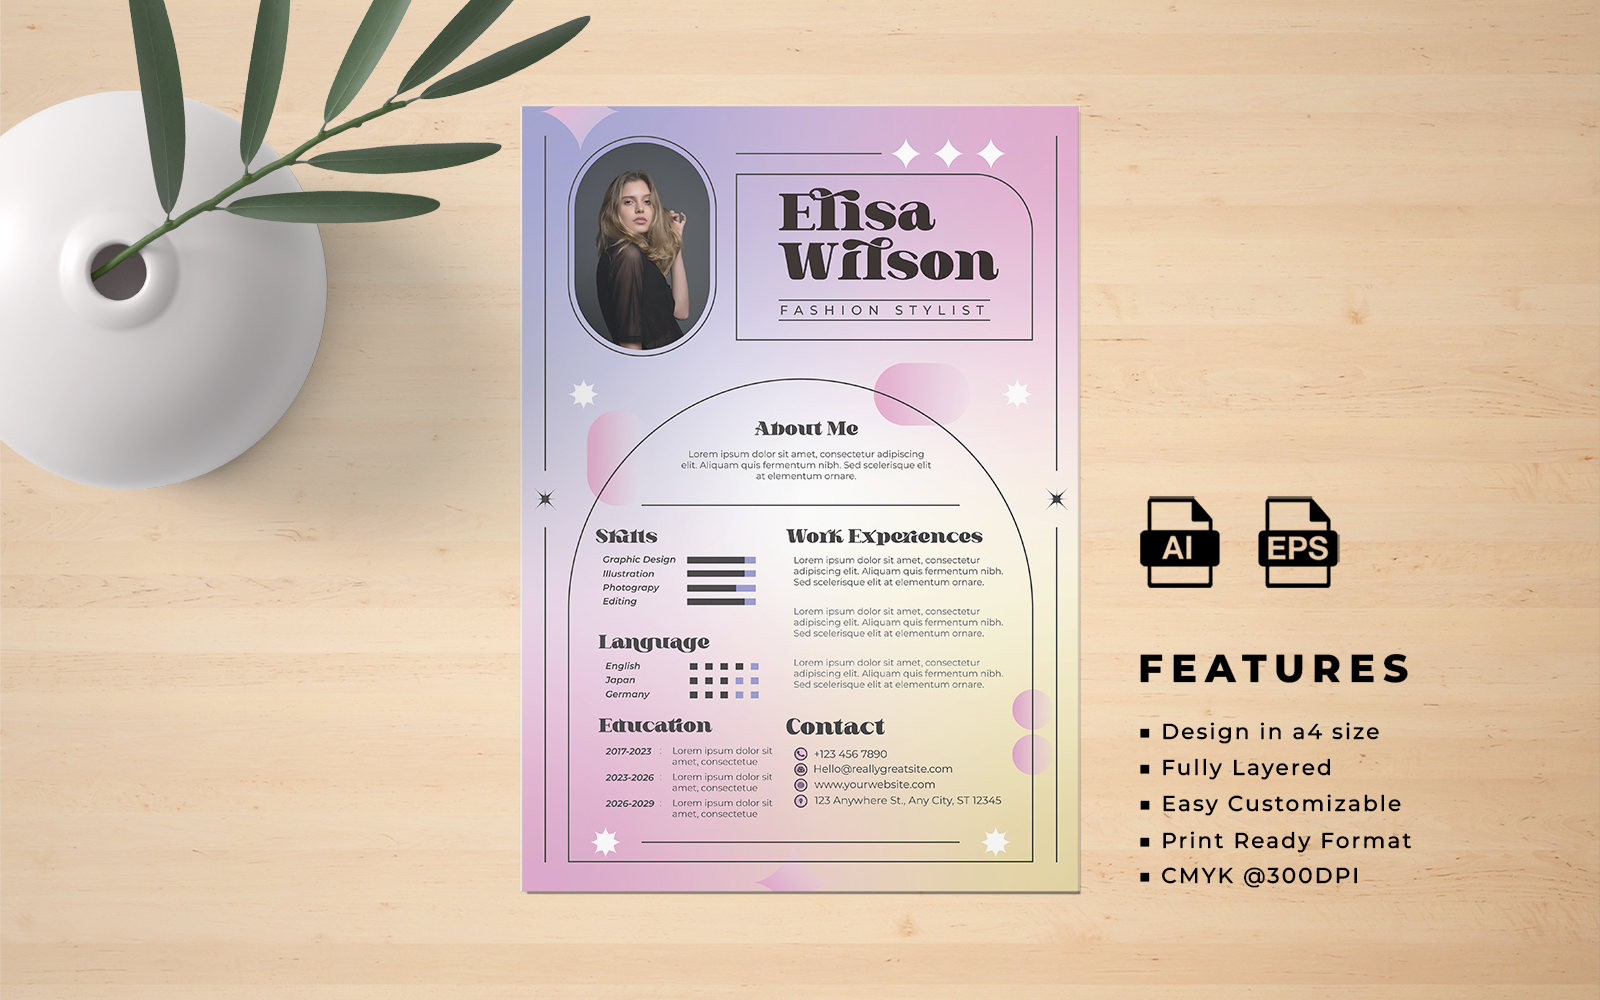 Resume and CV Flyer Template 8